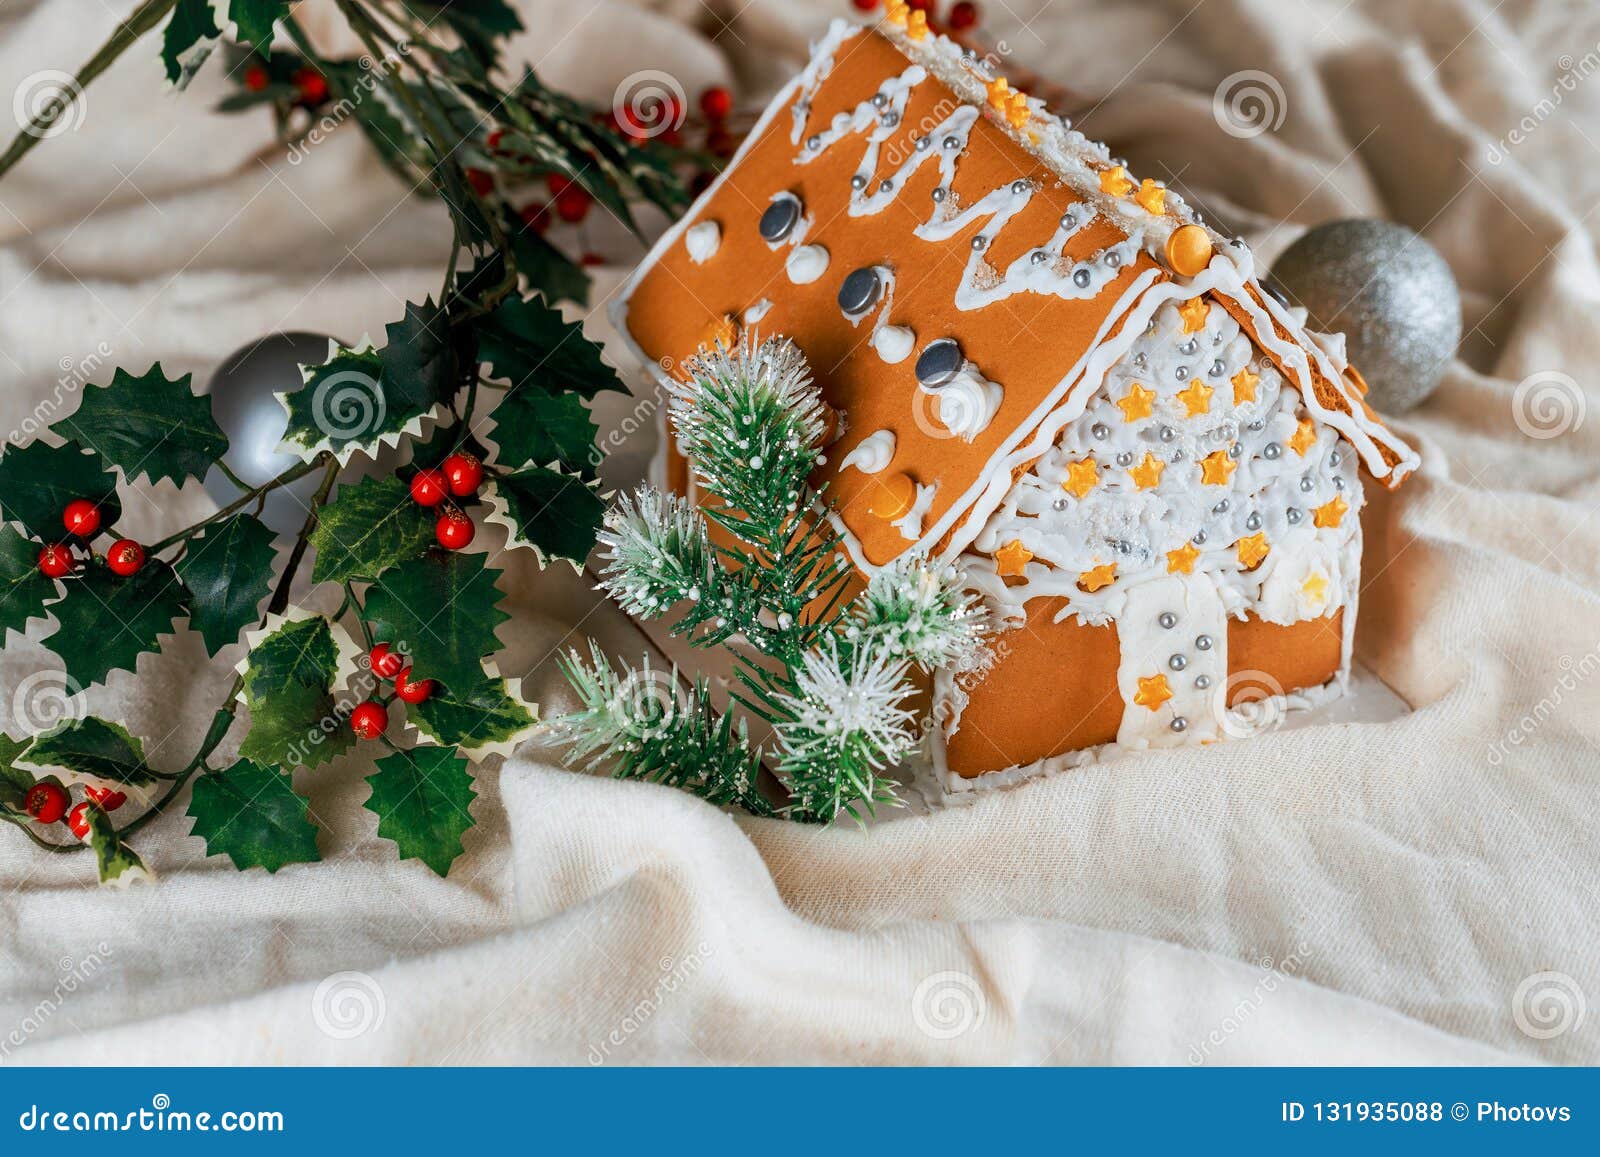 Homemade Gingerbread House With Christmas Tree Decorations